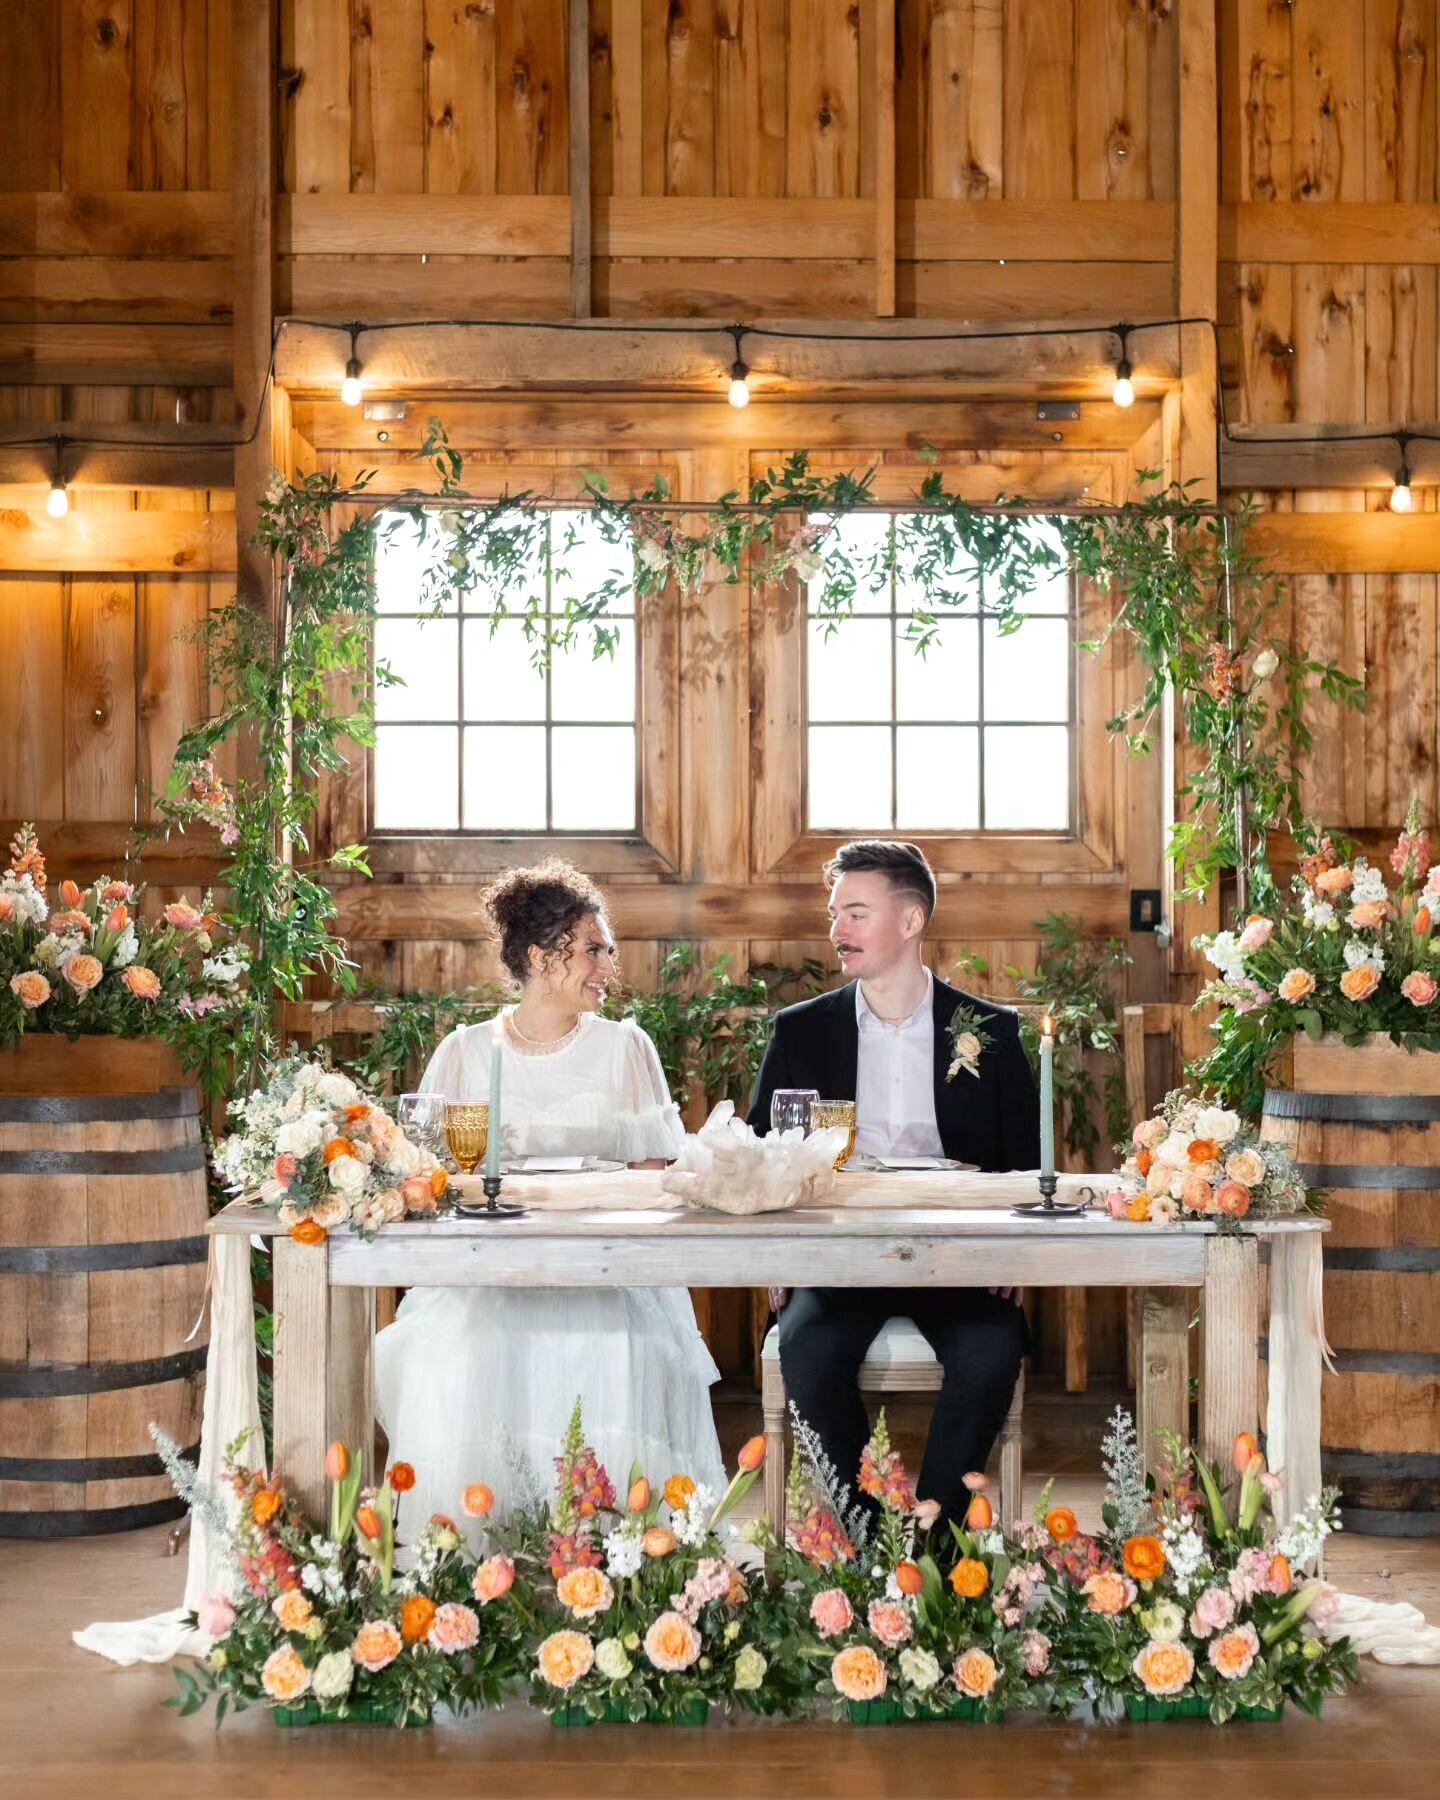 A wedding colored with peach and sage, surrounded by fields and flowers, and filled with love. ✨

Images captured by our amazing lead photographer, Drew 💕📸

Amazing vendor team:
Photo + Video |&nbsp;&nbsp;@peytonoliviastudios
Design &amp; Coordinat